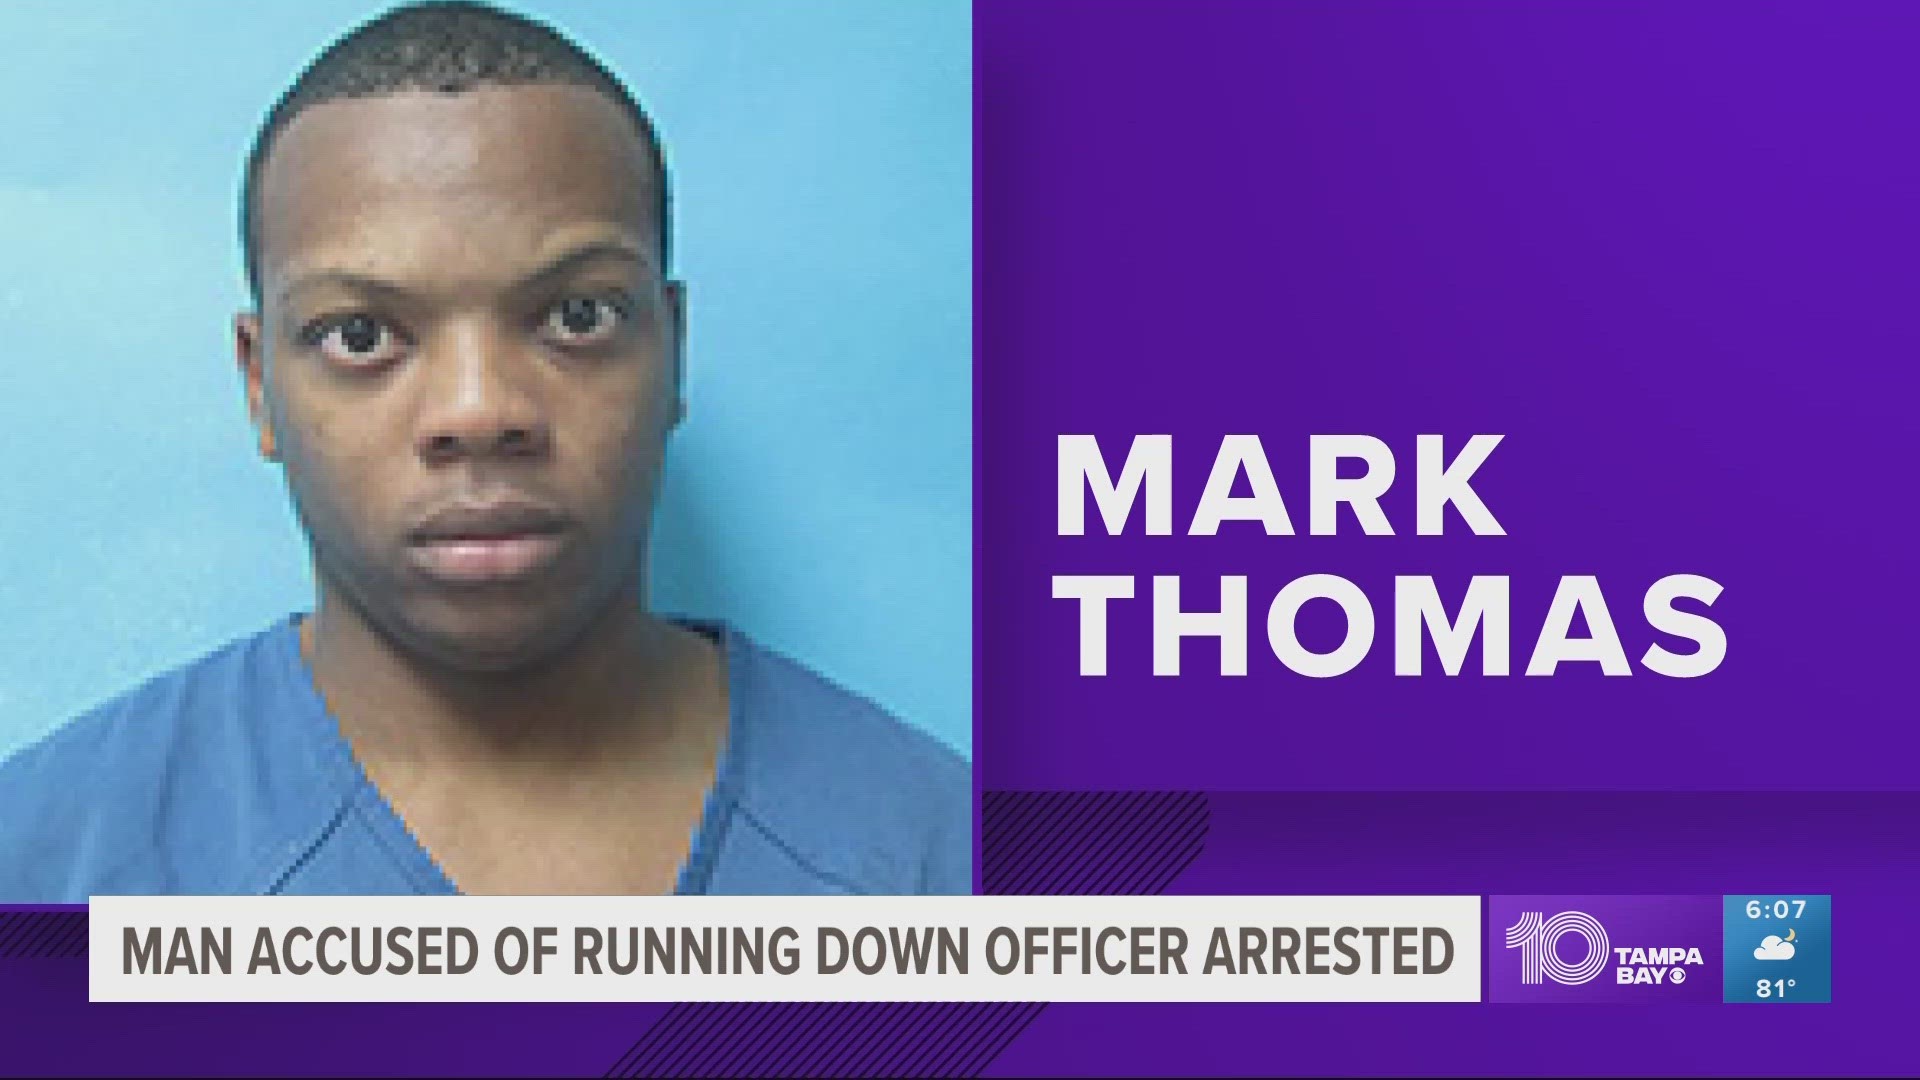 Mark Thomas faces multiple charges including aggravated battery on a law enforcement officer.